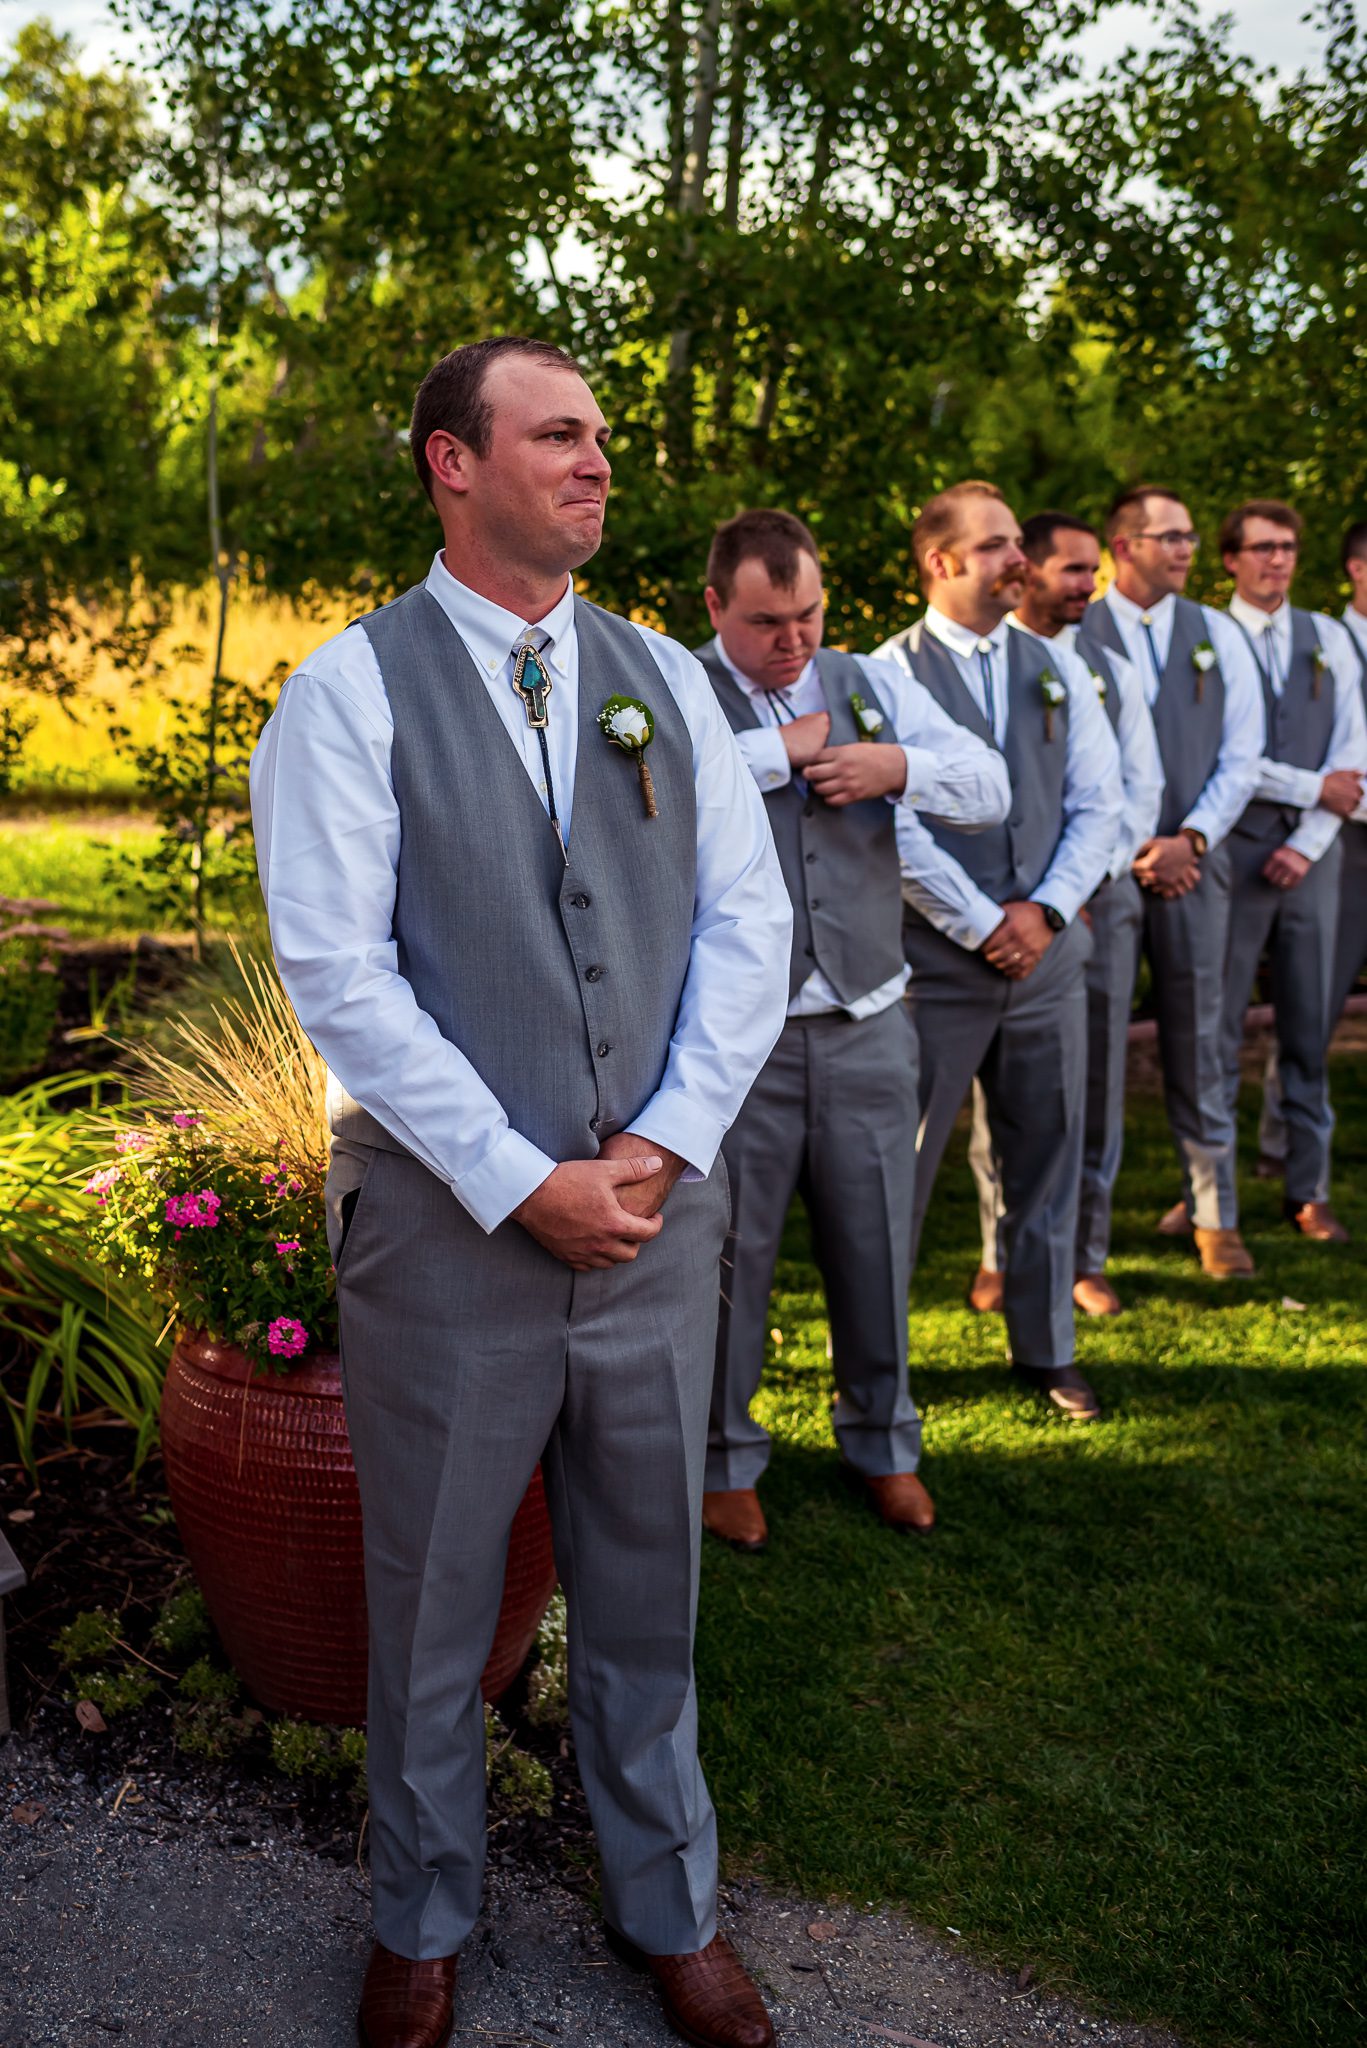 A groom stands waiting for his bride to walk down the isle during their wedding at Denver Botanic Gardens Chatfield Farms